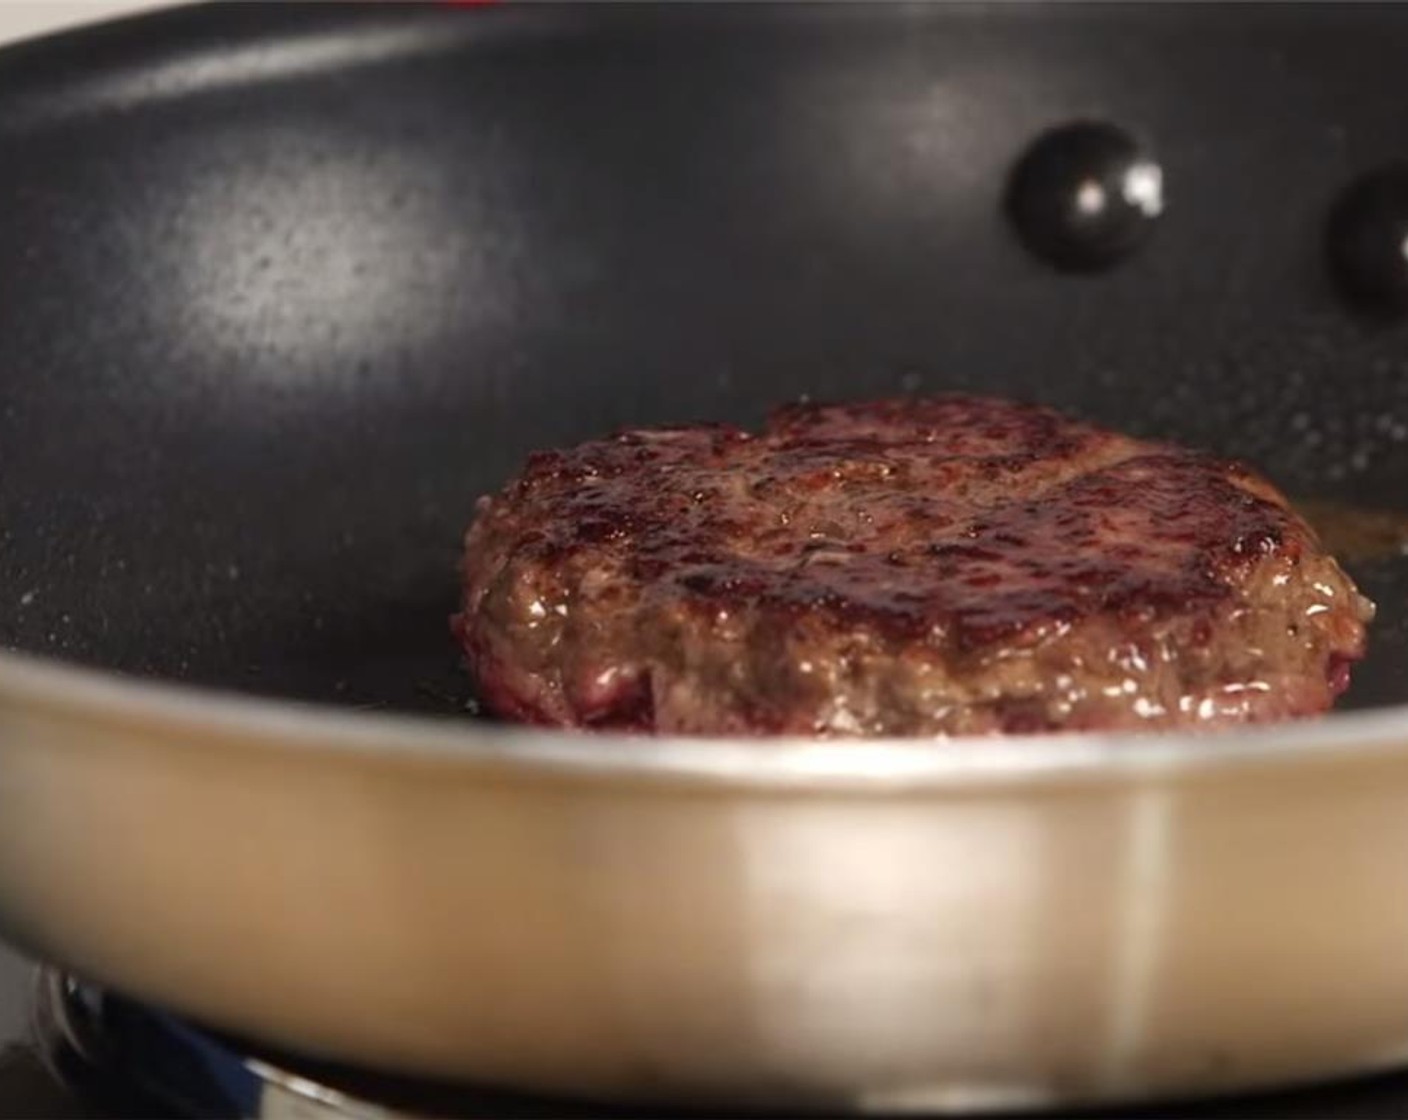 step 6 Season the Beef Patty (1) with Soy Sauce (to taste), Salt (to taste), Ground Black Pepper (to taste), and Sesame Oil (as needed). Wipe out the skillet, and cook the burger over medium-high heat until medium-rare, or to your preferred degree of doneness.